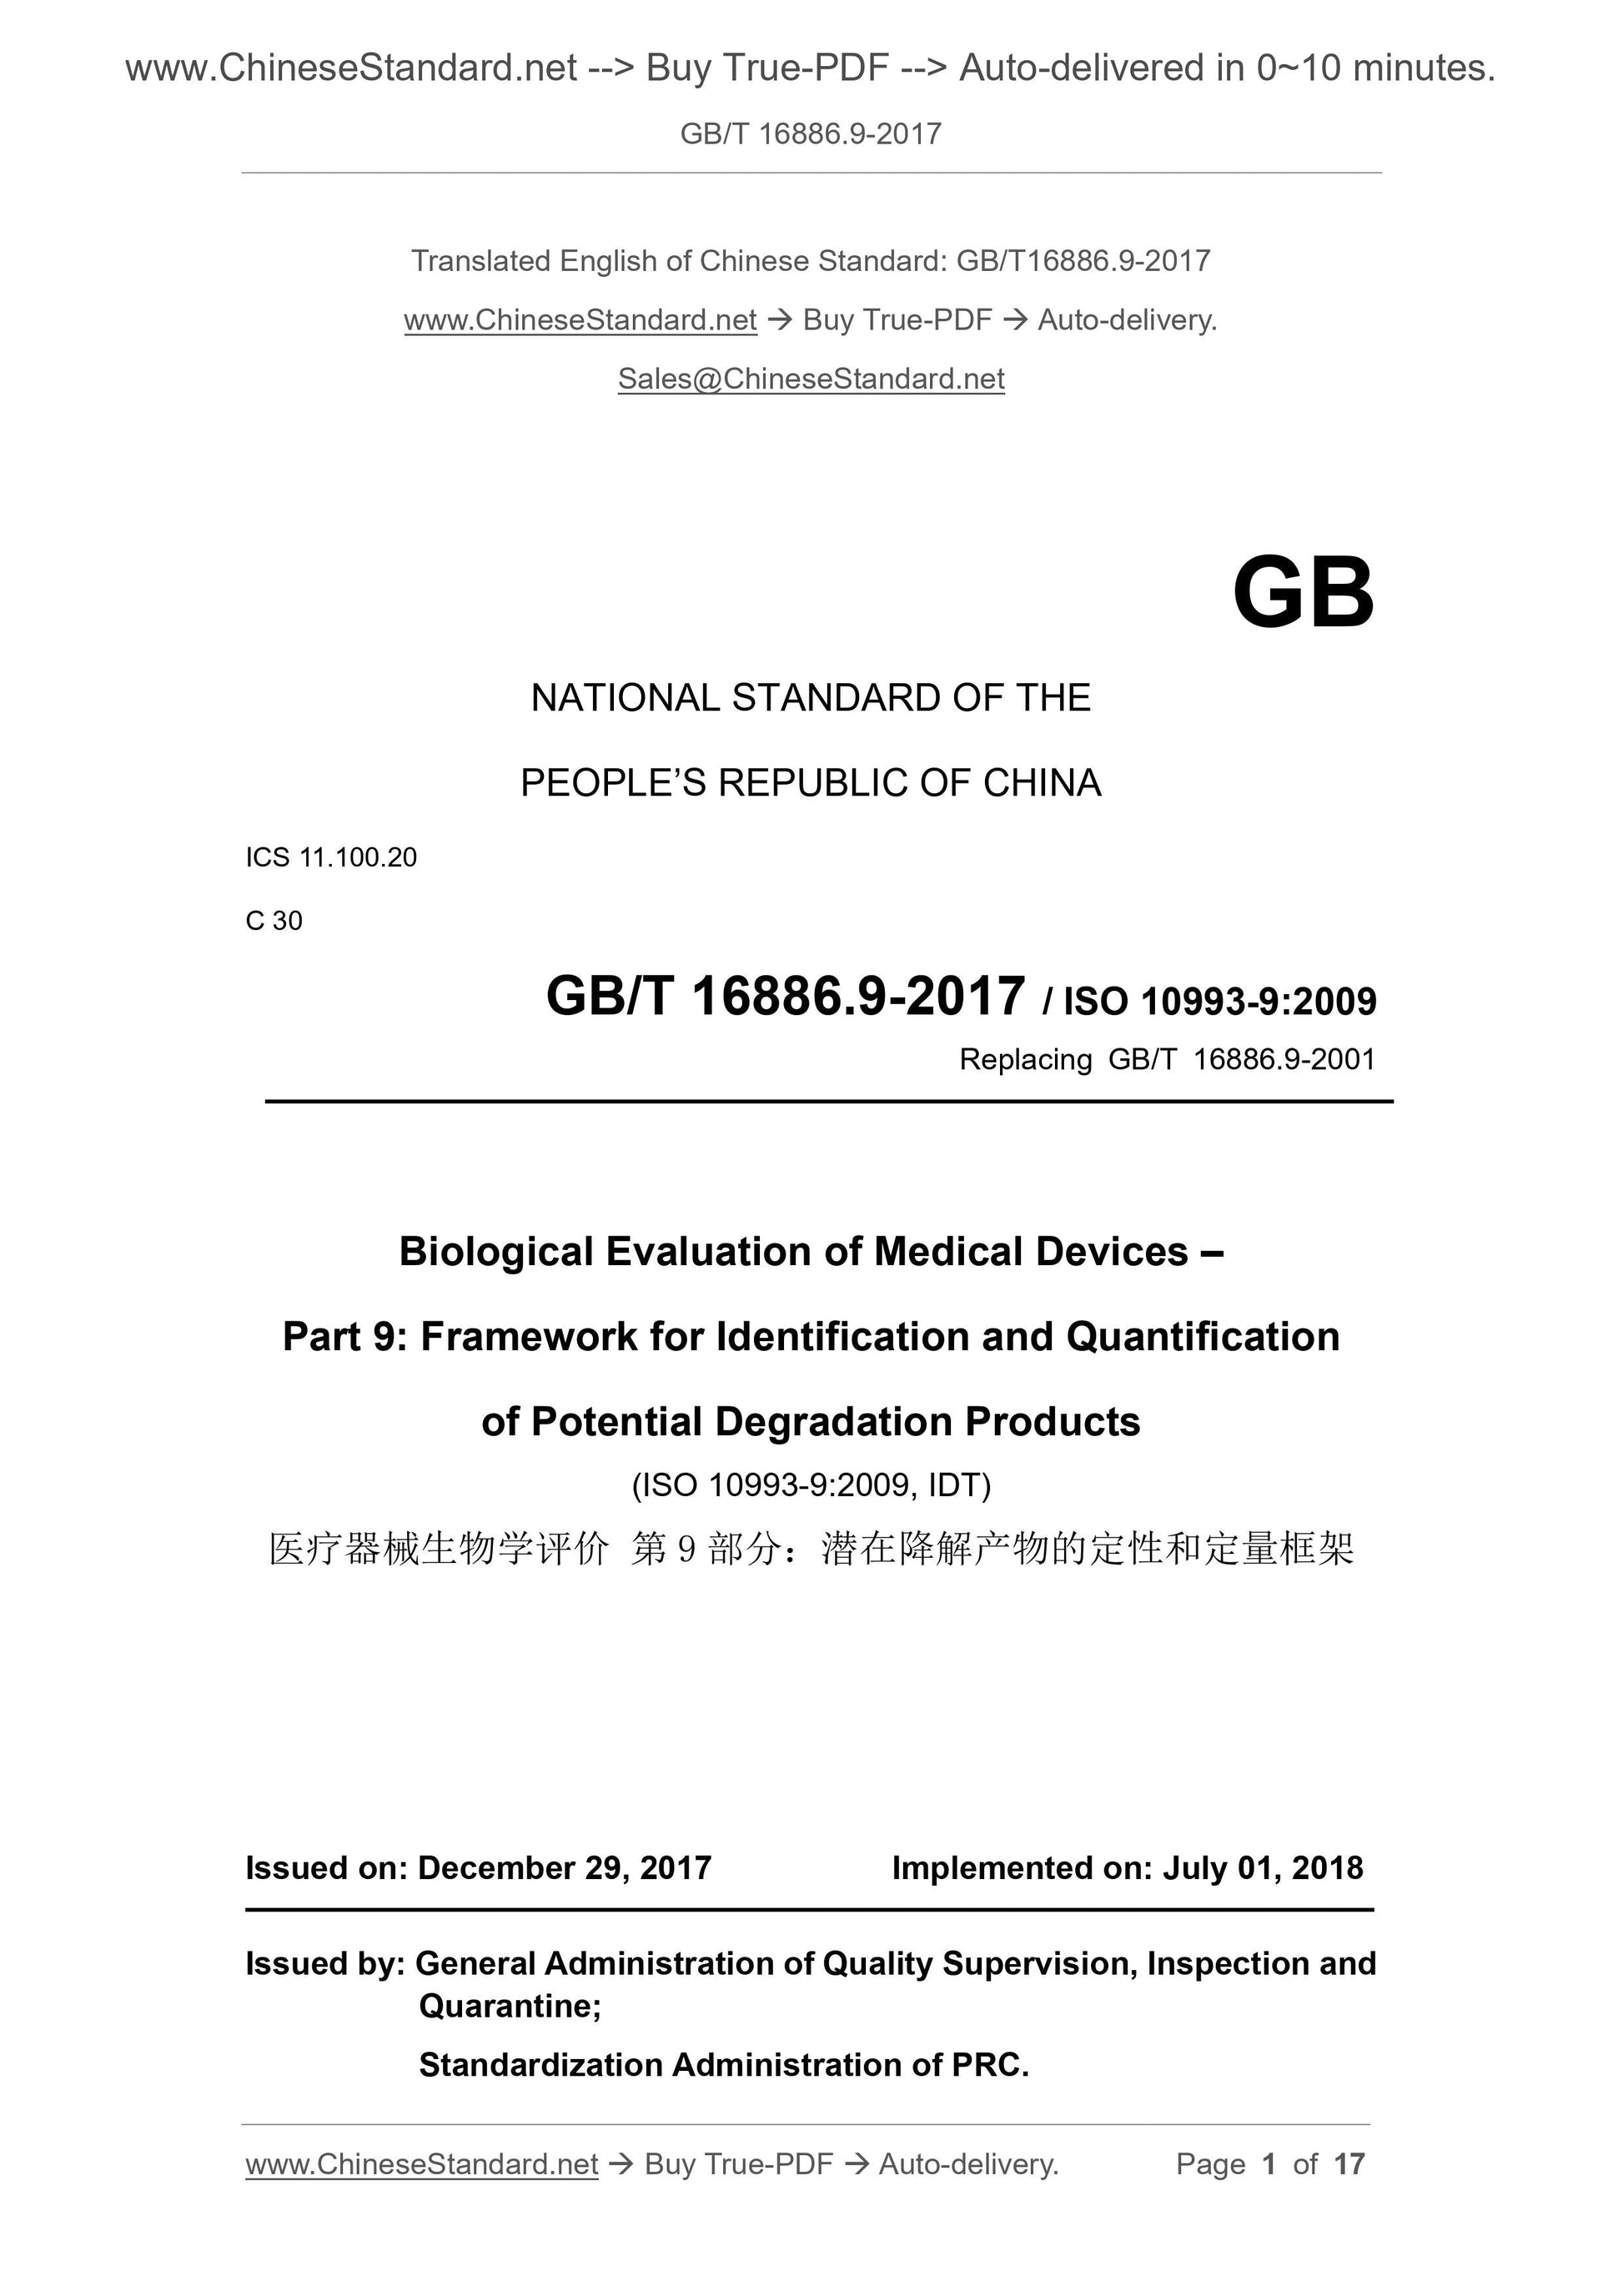 GB/T 16886.9-2017 Page 1